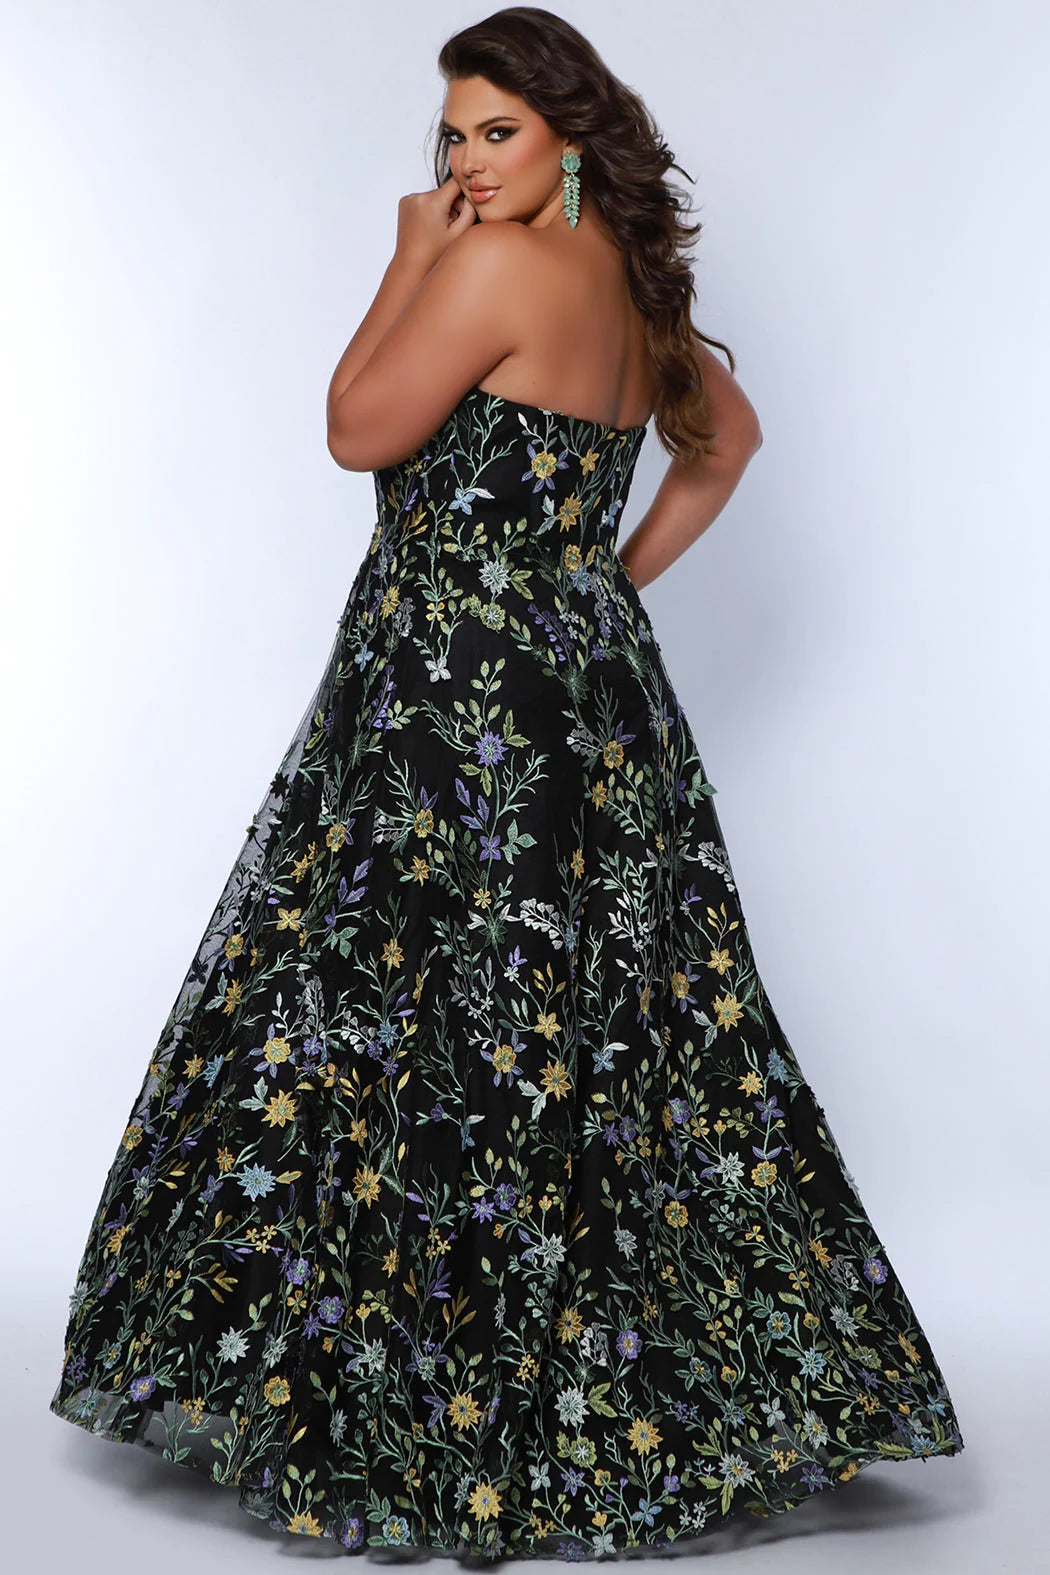 Sydneys Closet SC7381 Long Prom Dress Plus Size A-Line Sweetheart Stapless  Floral Formal Gown